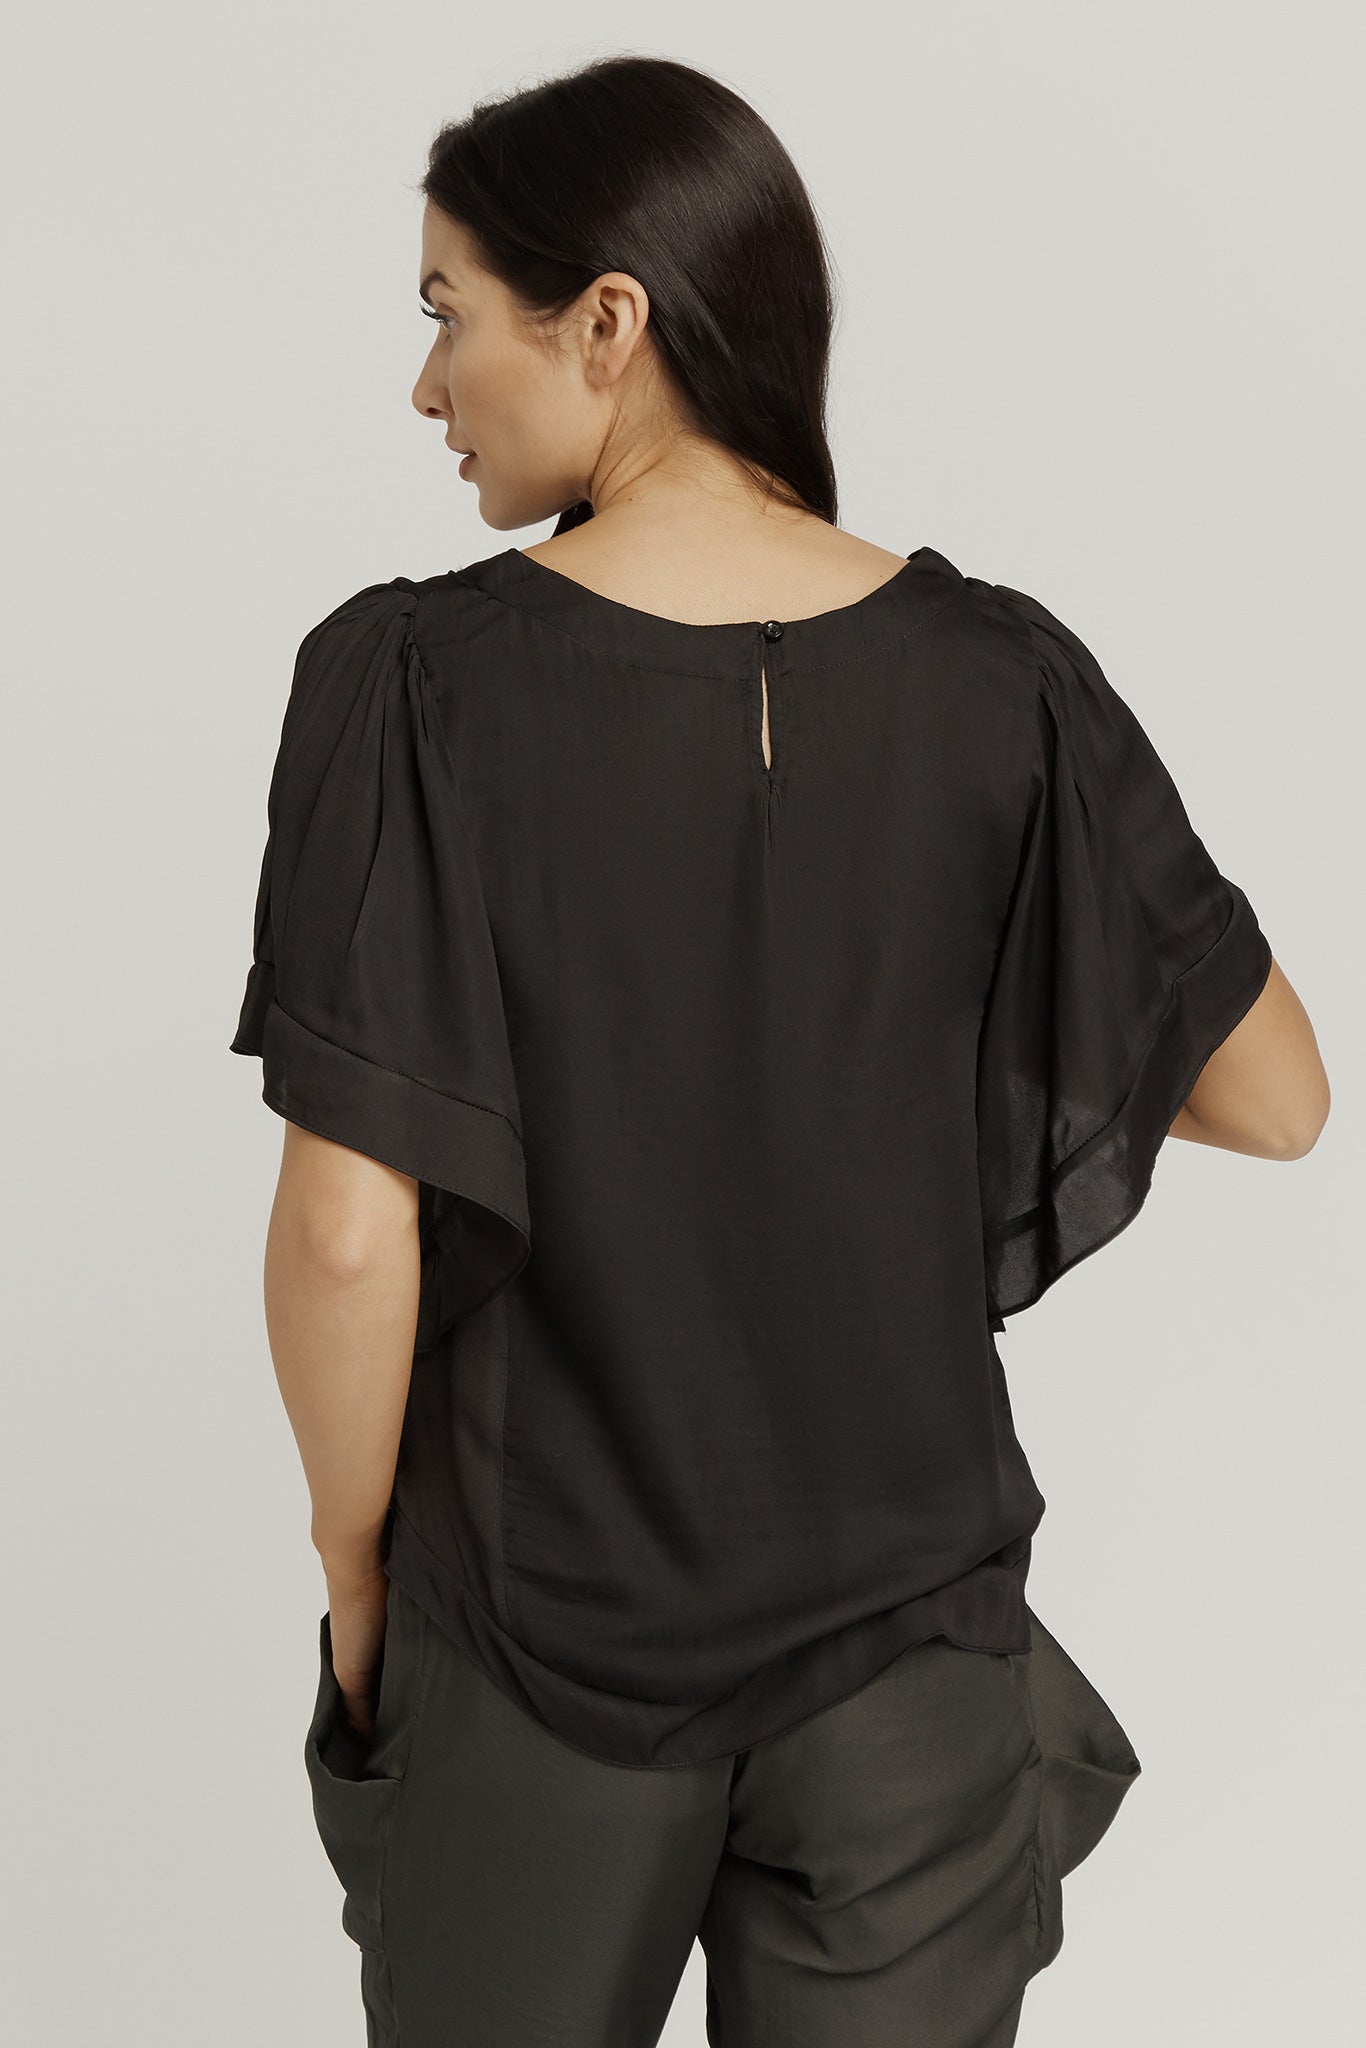 TOP with SHORT BELLE SLEEVE / BLACK